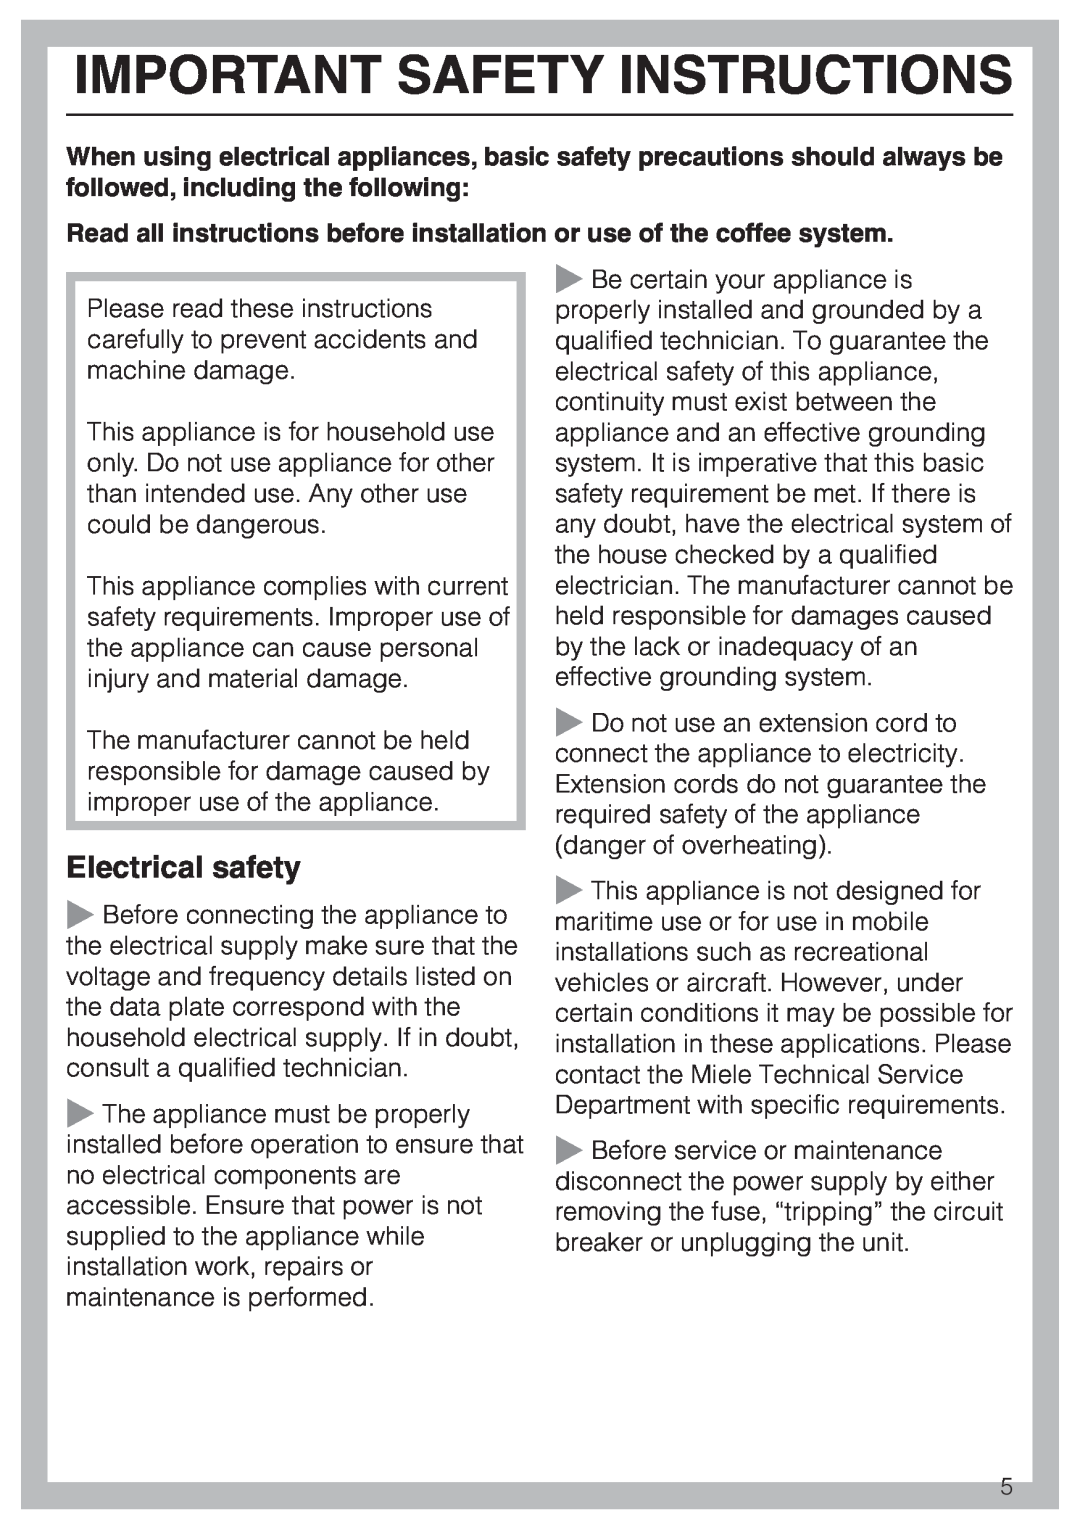 Miele CVA 2660 installation instructions Important Safety Instructions, Electrical safety 